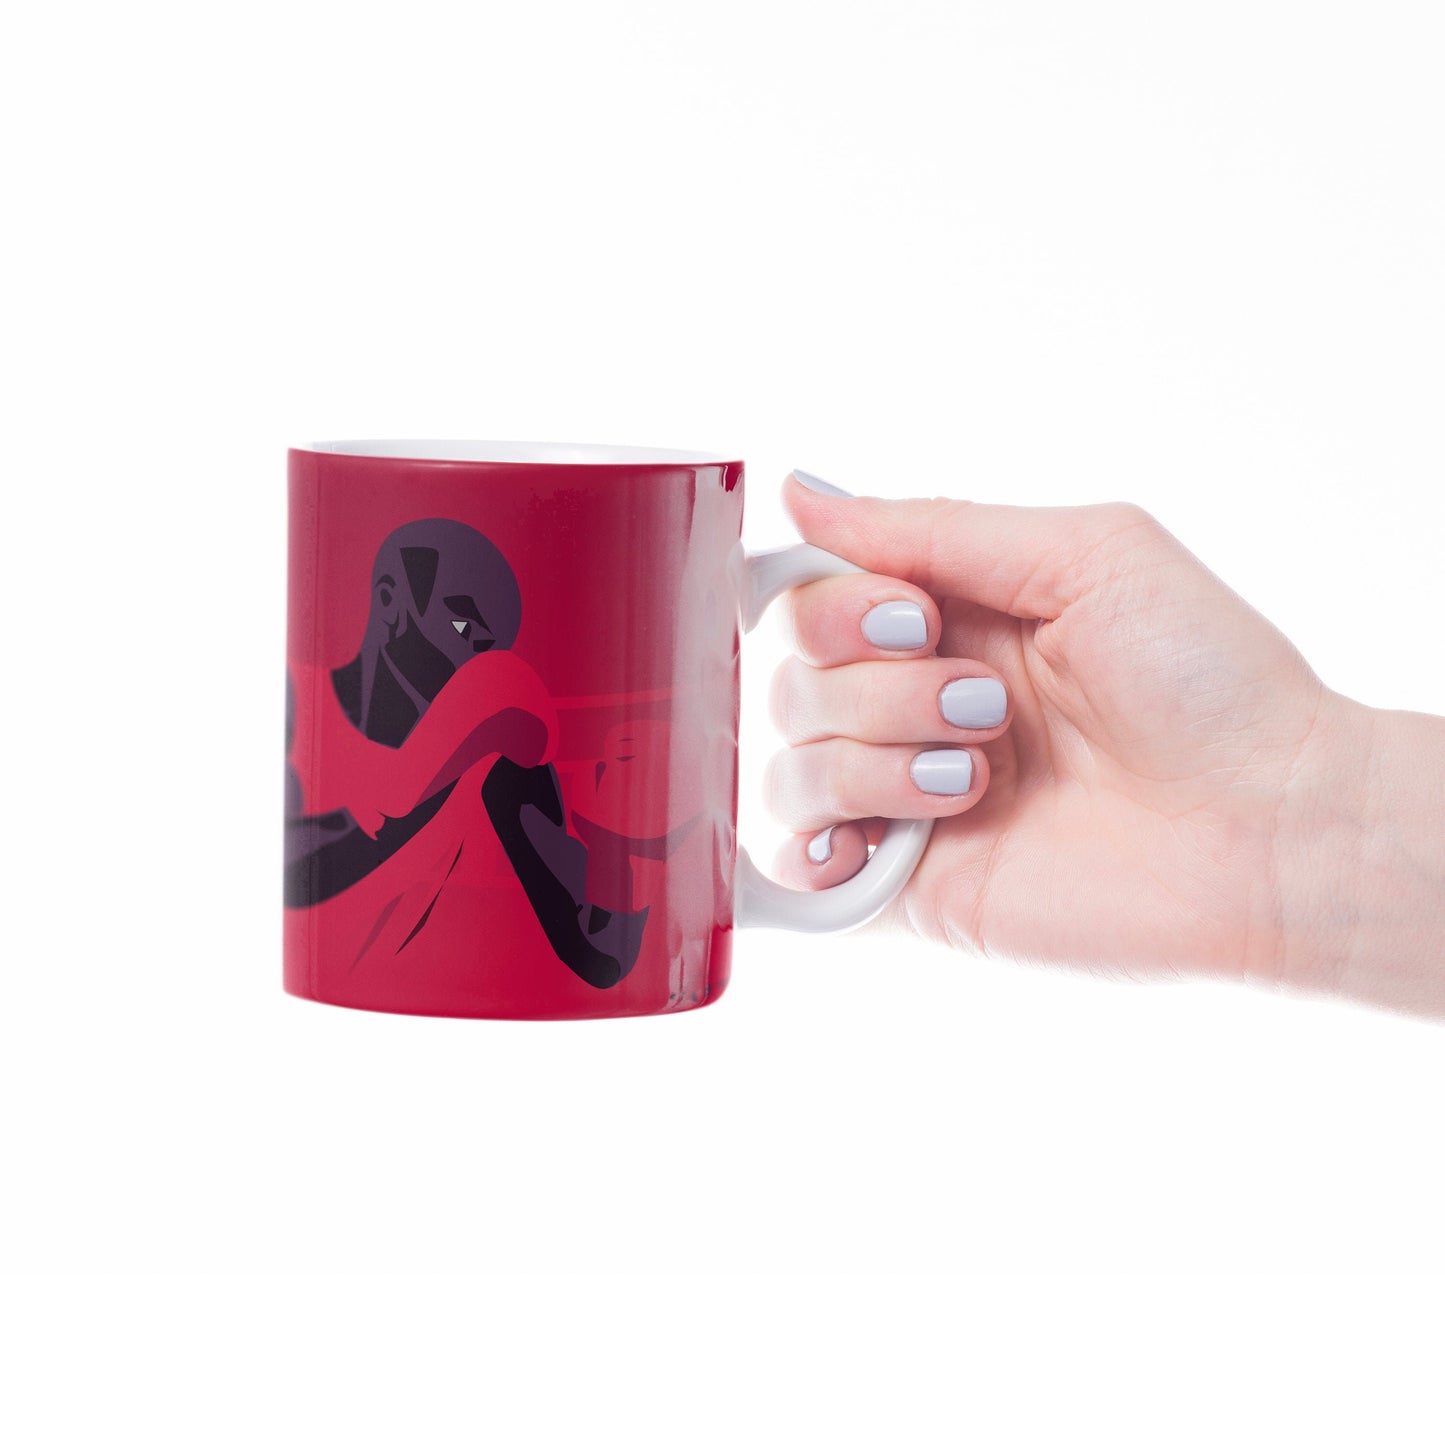 Boxing/boxing cup or mug "The red boxer" - Customizable